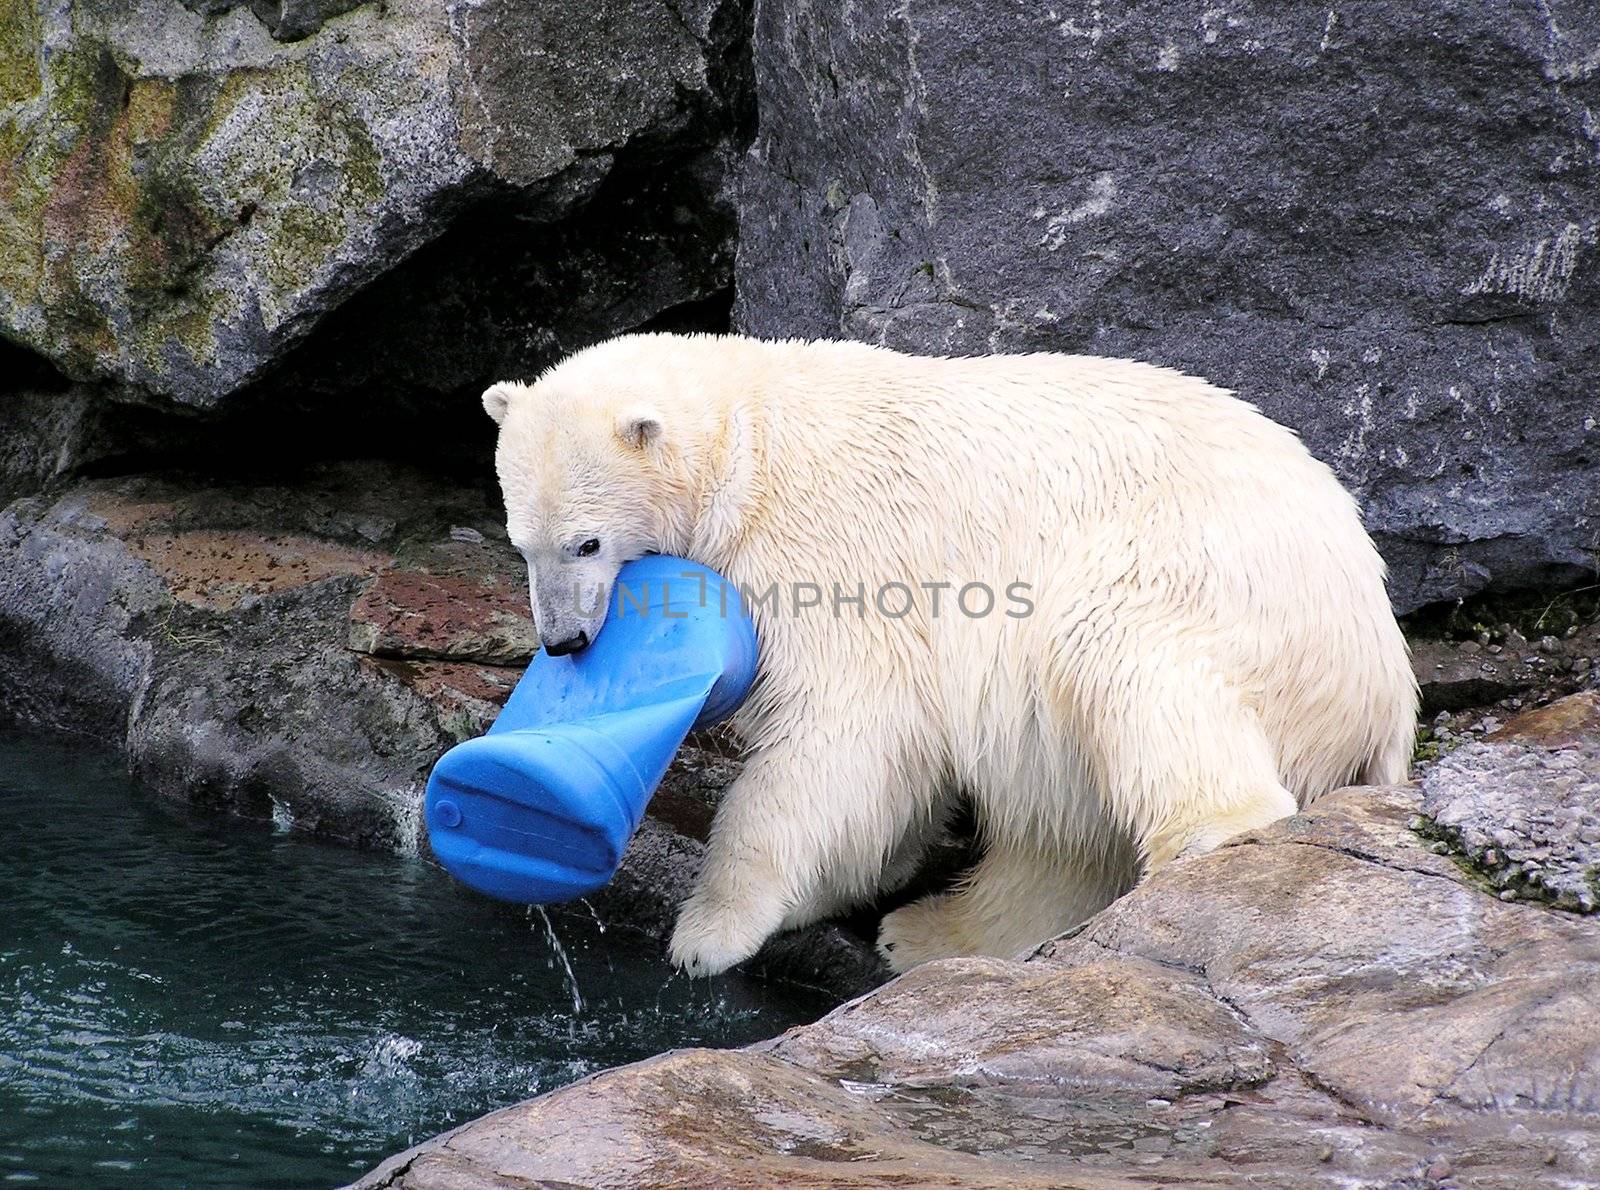 Polar bear playing in and out of the water with a plastic blue bucket